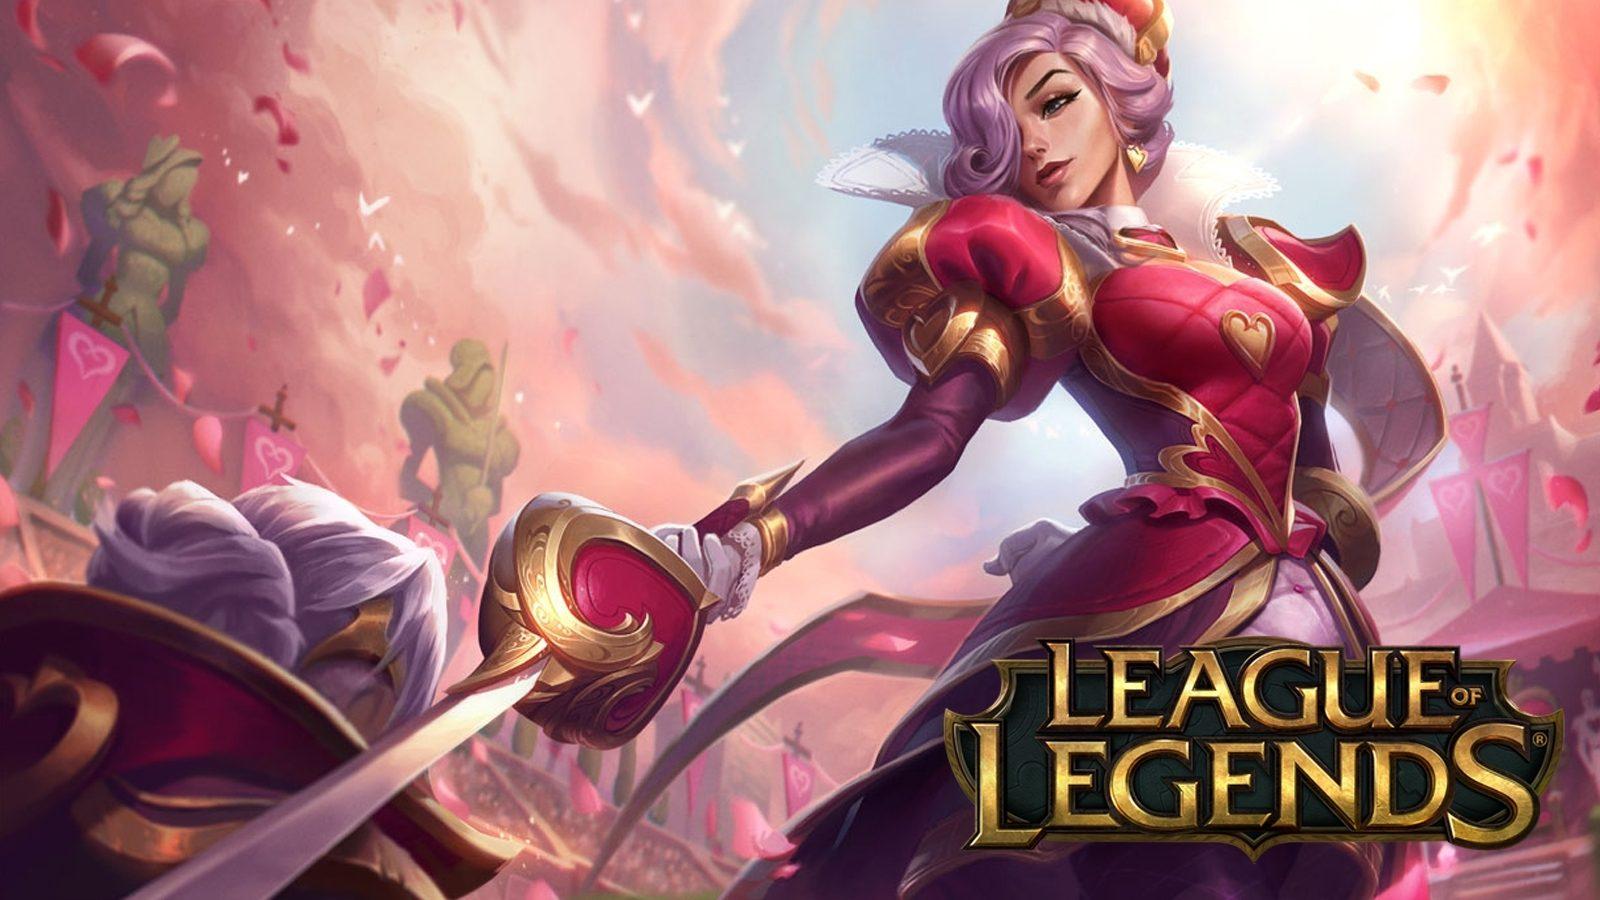 These are the best League of Legends skins from 2019 